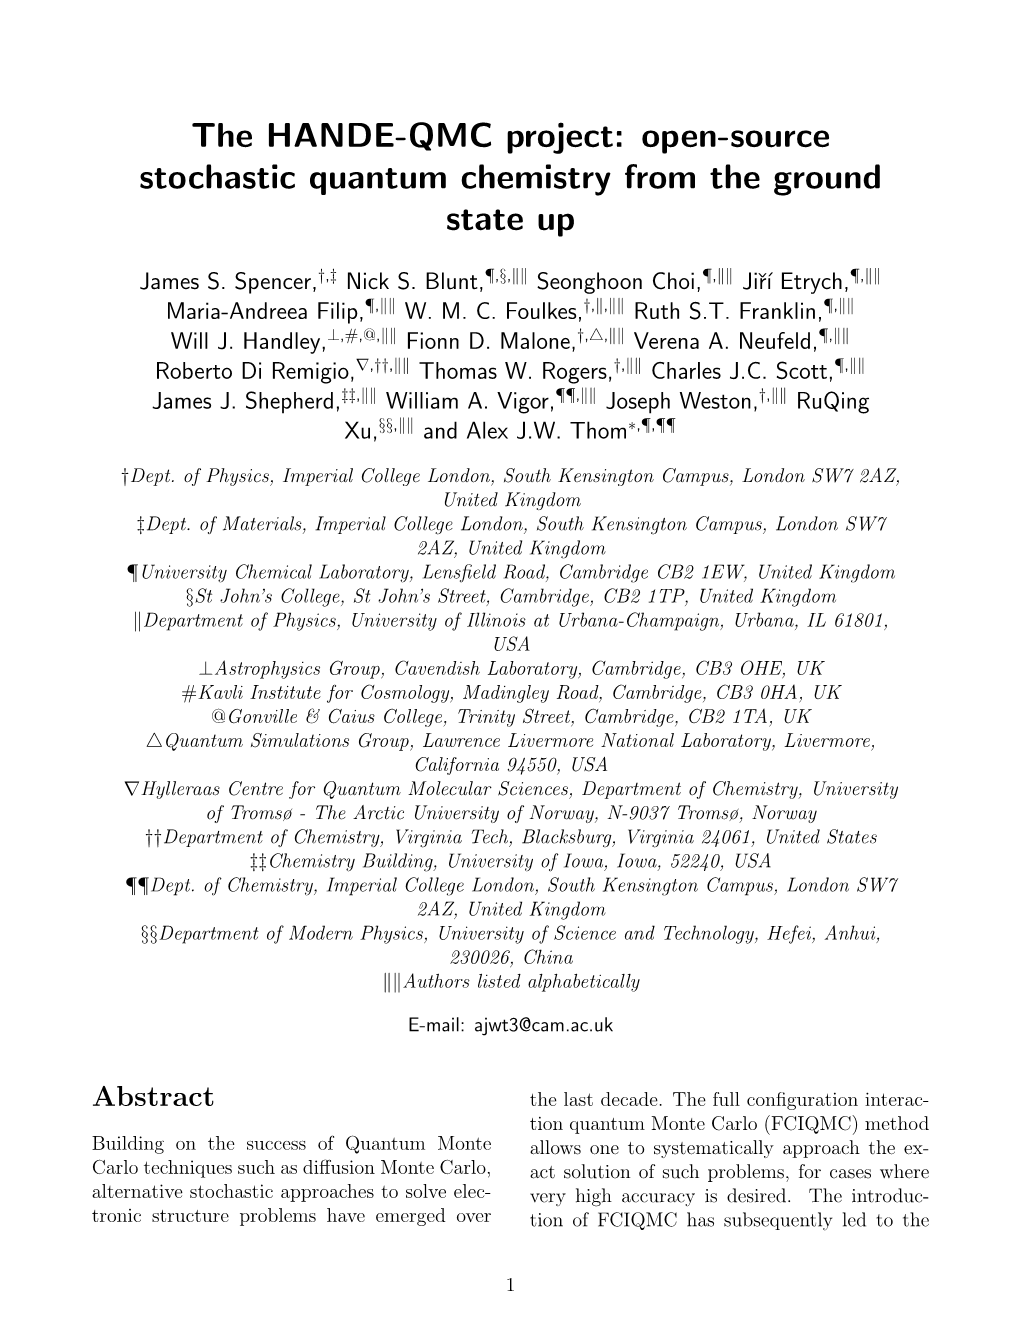 The HANDE-QMC Project: Open-Source Stochastic Quantum Chemistry from the Ground State Up